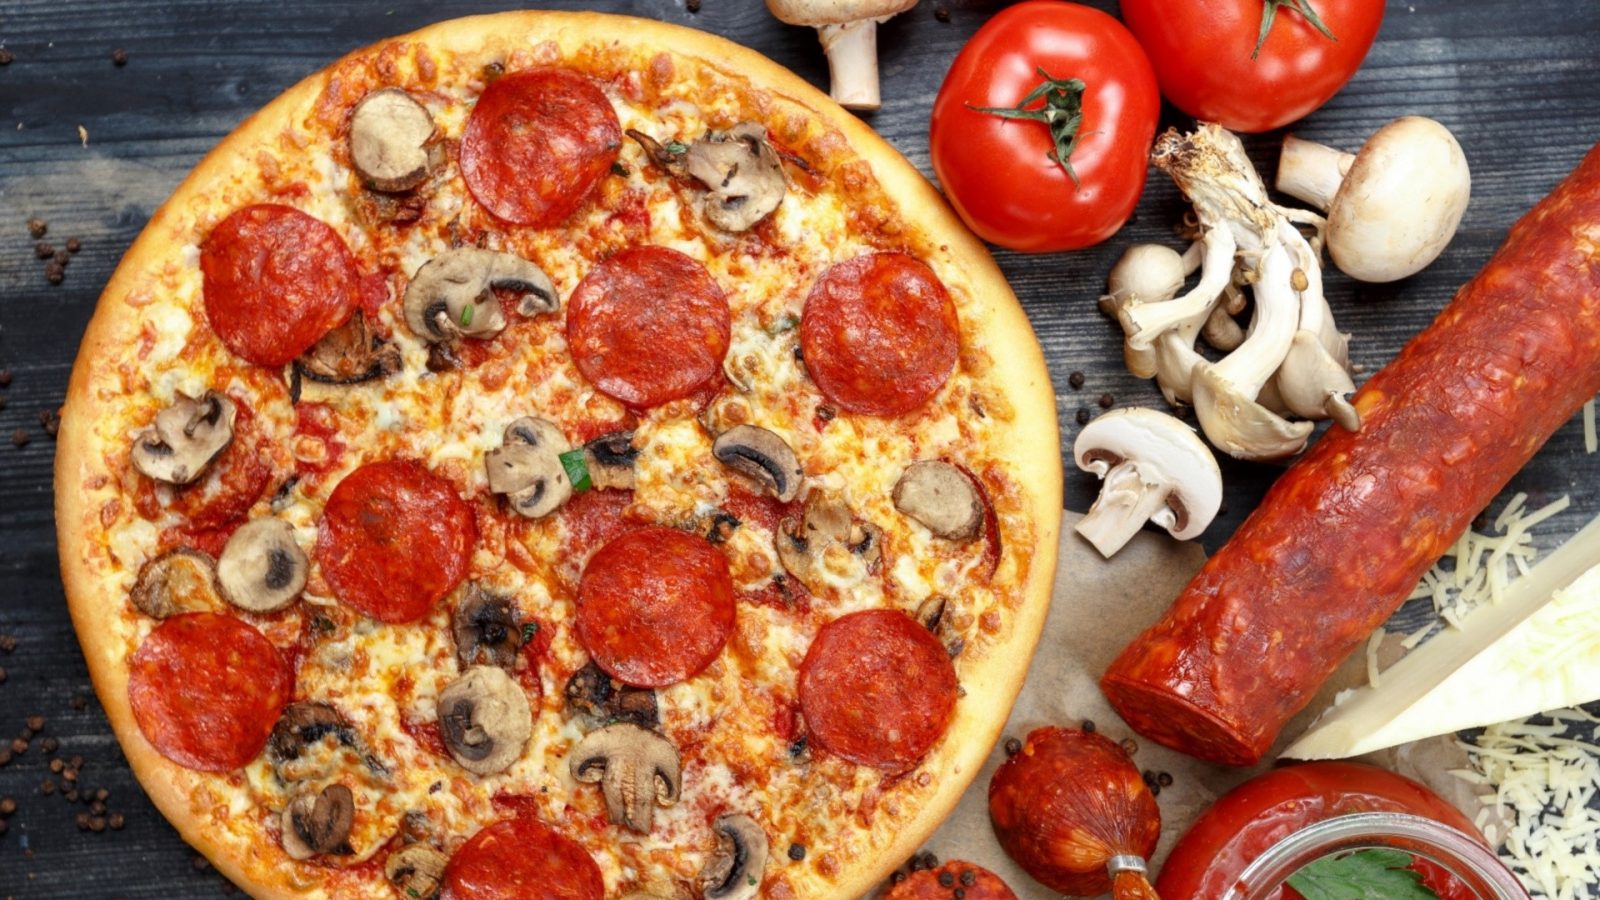 🍕 What’s Your Age Based on Your Comfort Food Choices? 🍰 Salami Sausage Pepperoni Mushroom Pizza